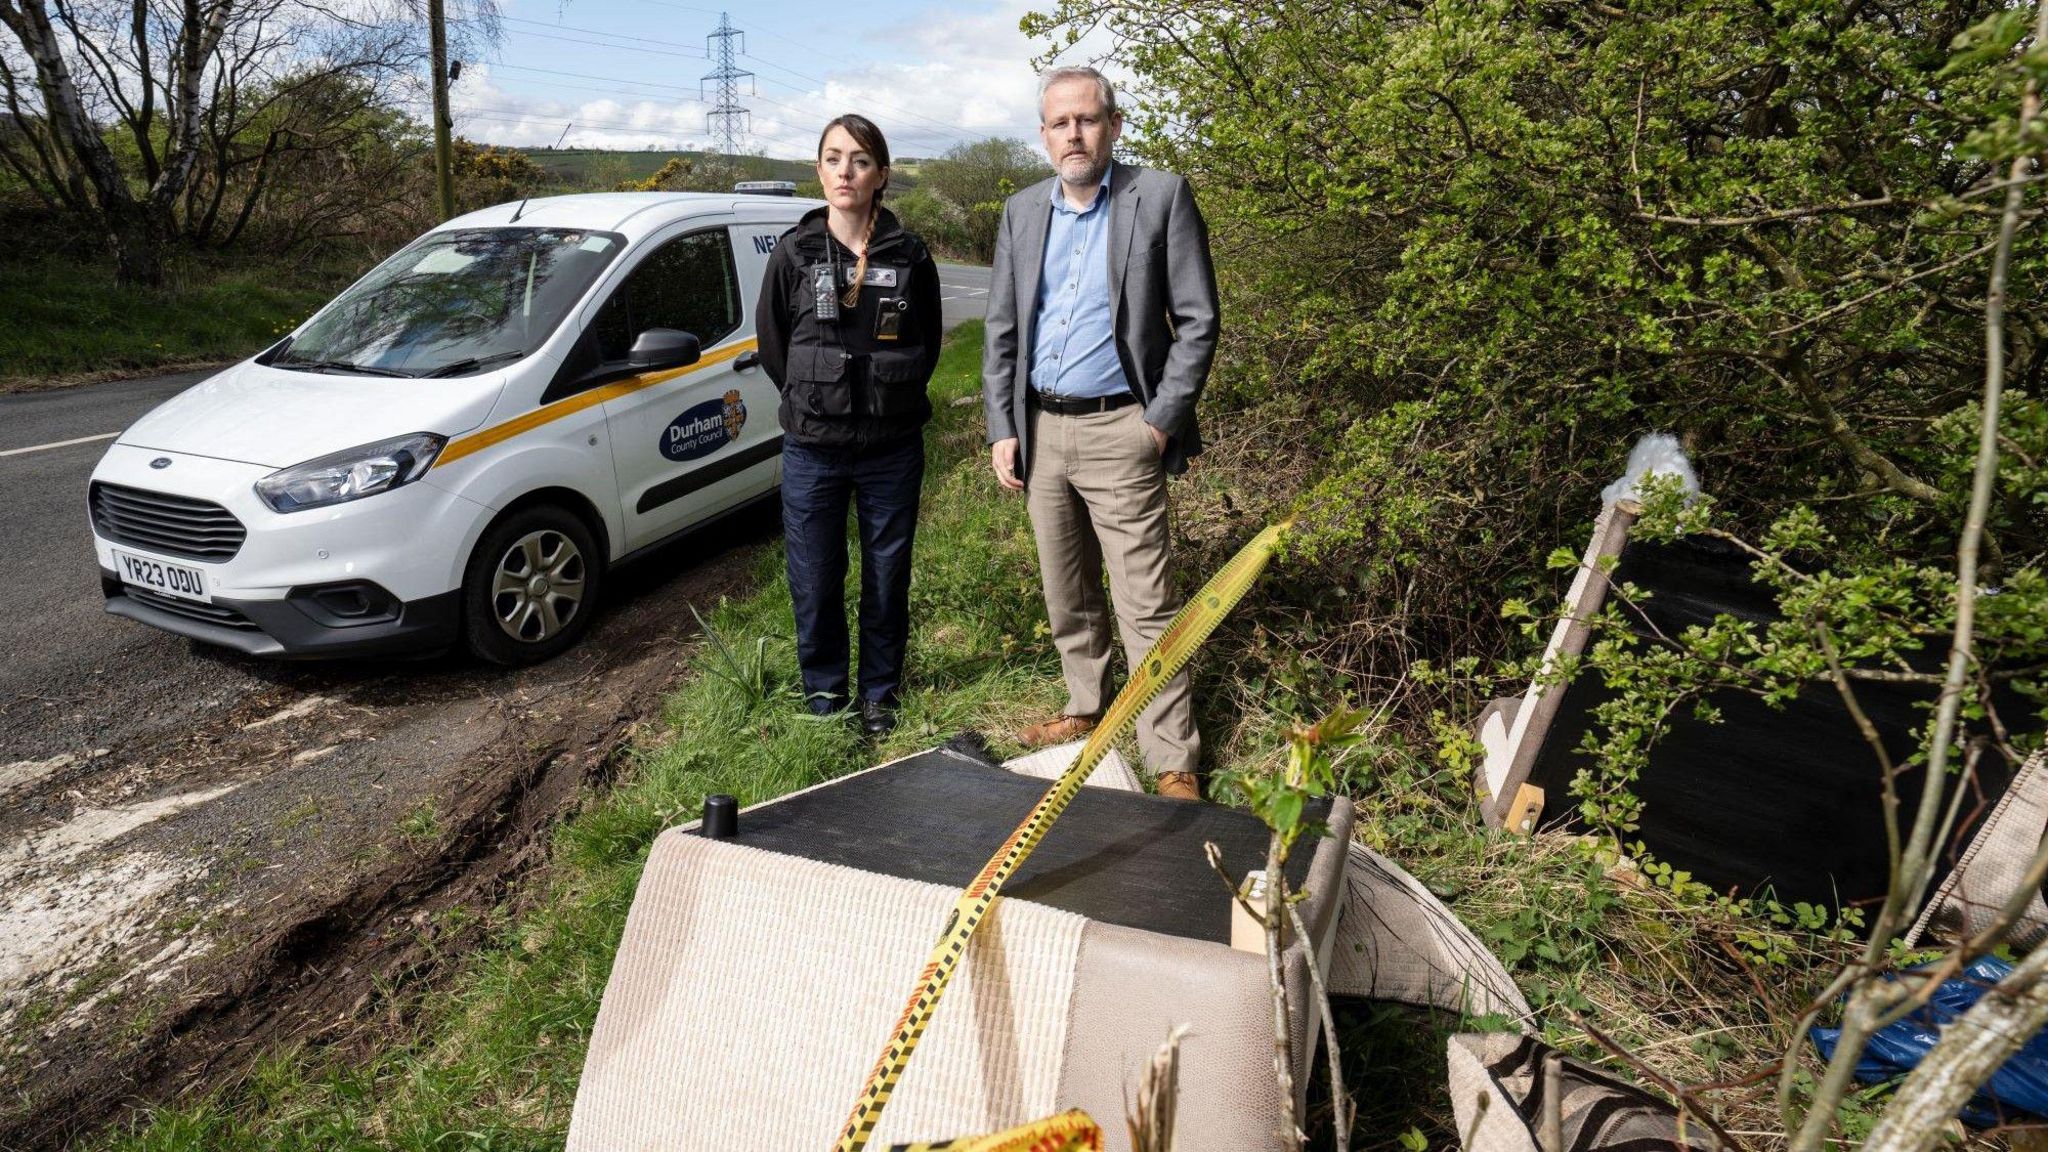 Cllr Mark Wilkes, Durham County Council’s Cabinet member for neighbourhoods and climate change, is pictured with neighbourhood warden Claire Liddle looking at a fly-tip in the Esh area with a Durham County Council van behind them 